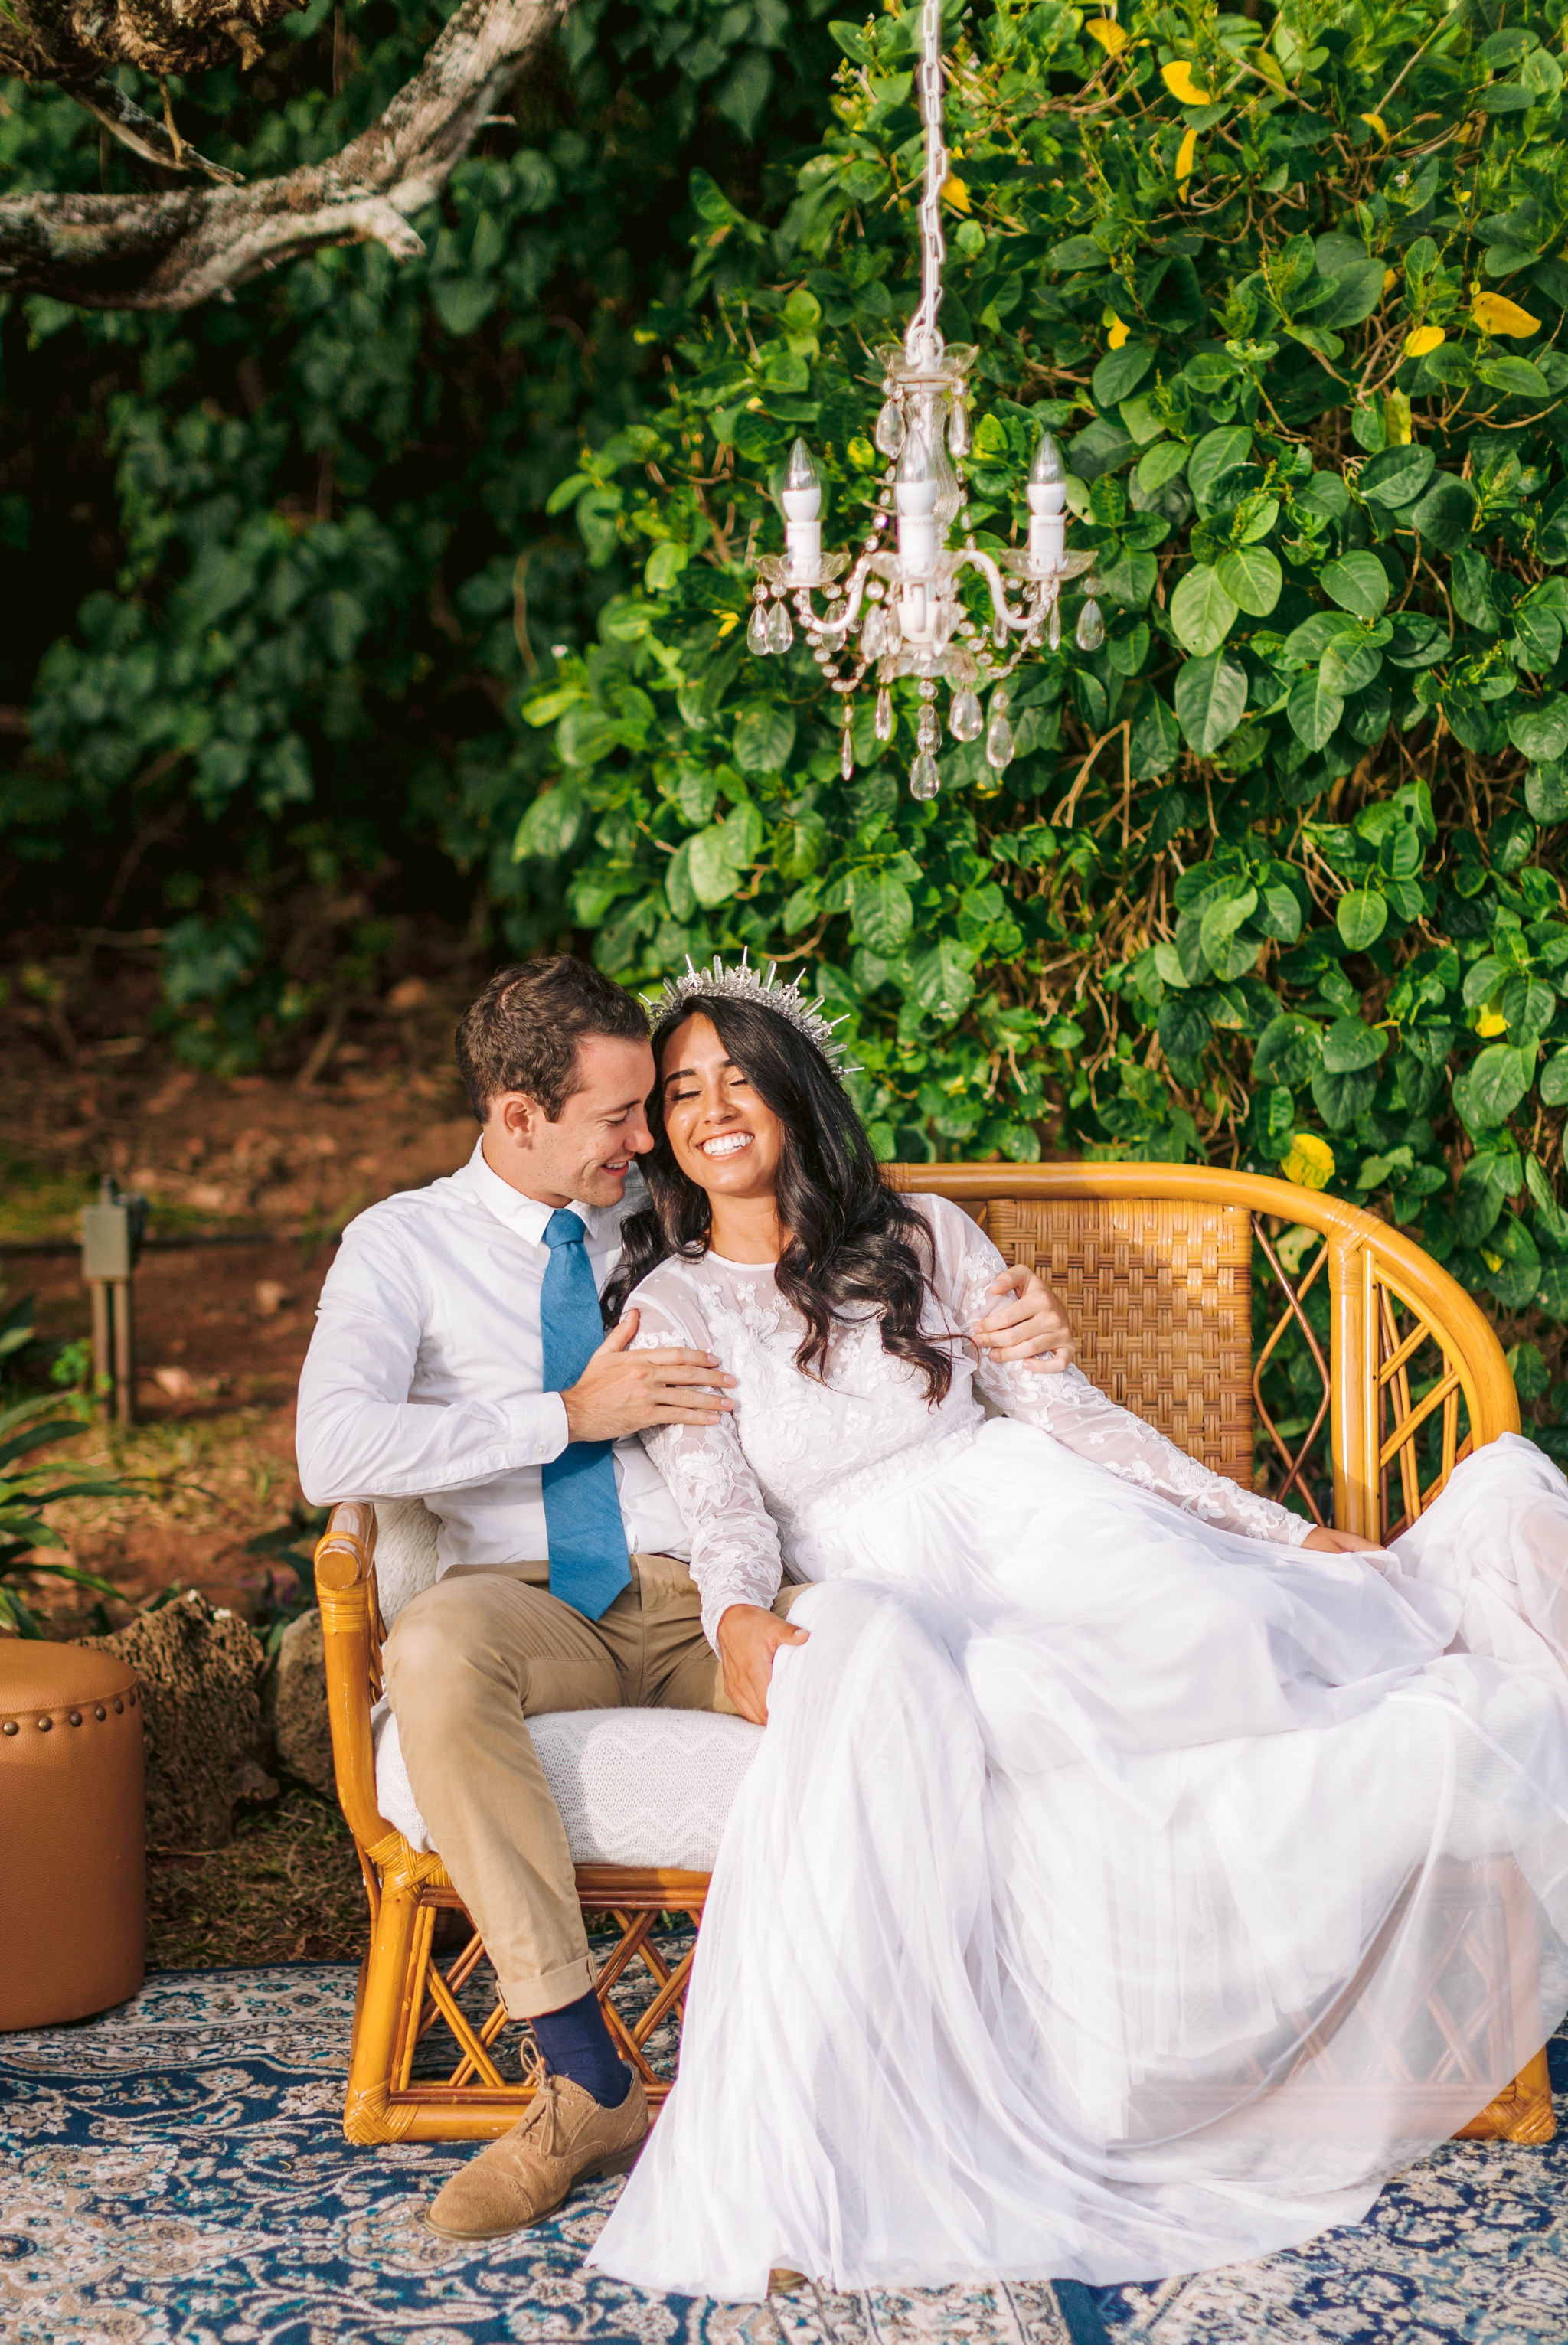  Bride and groom cuddeling an outdoor lounge - white dress by asos - unique crystal crown Ana + Elijah - Wedding at Loulu Palm in Haleiwa, HI - Oahu Hawaii Wedding Photographer - #hawaiiweddingphotographer #oahuweddings #hawaiiweddings 